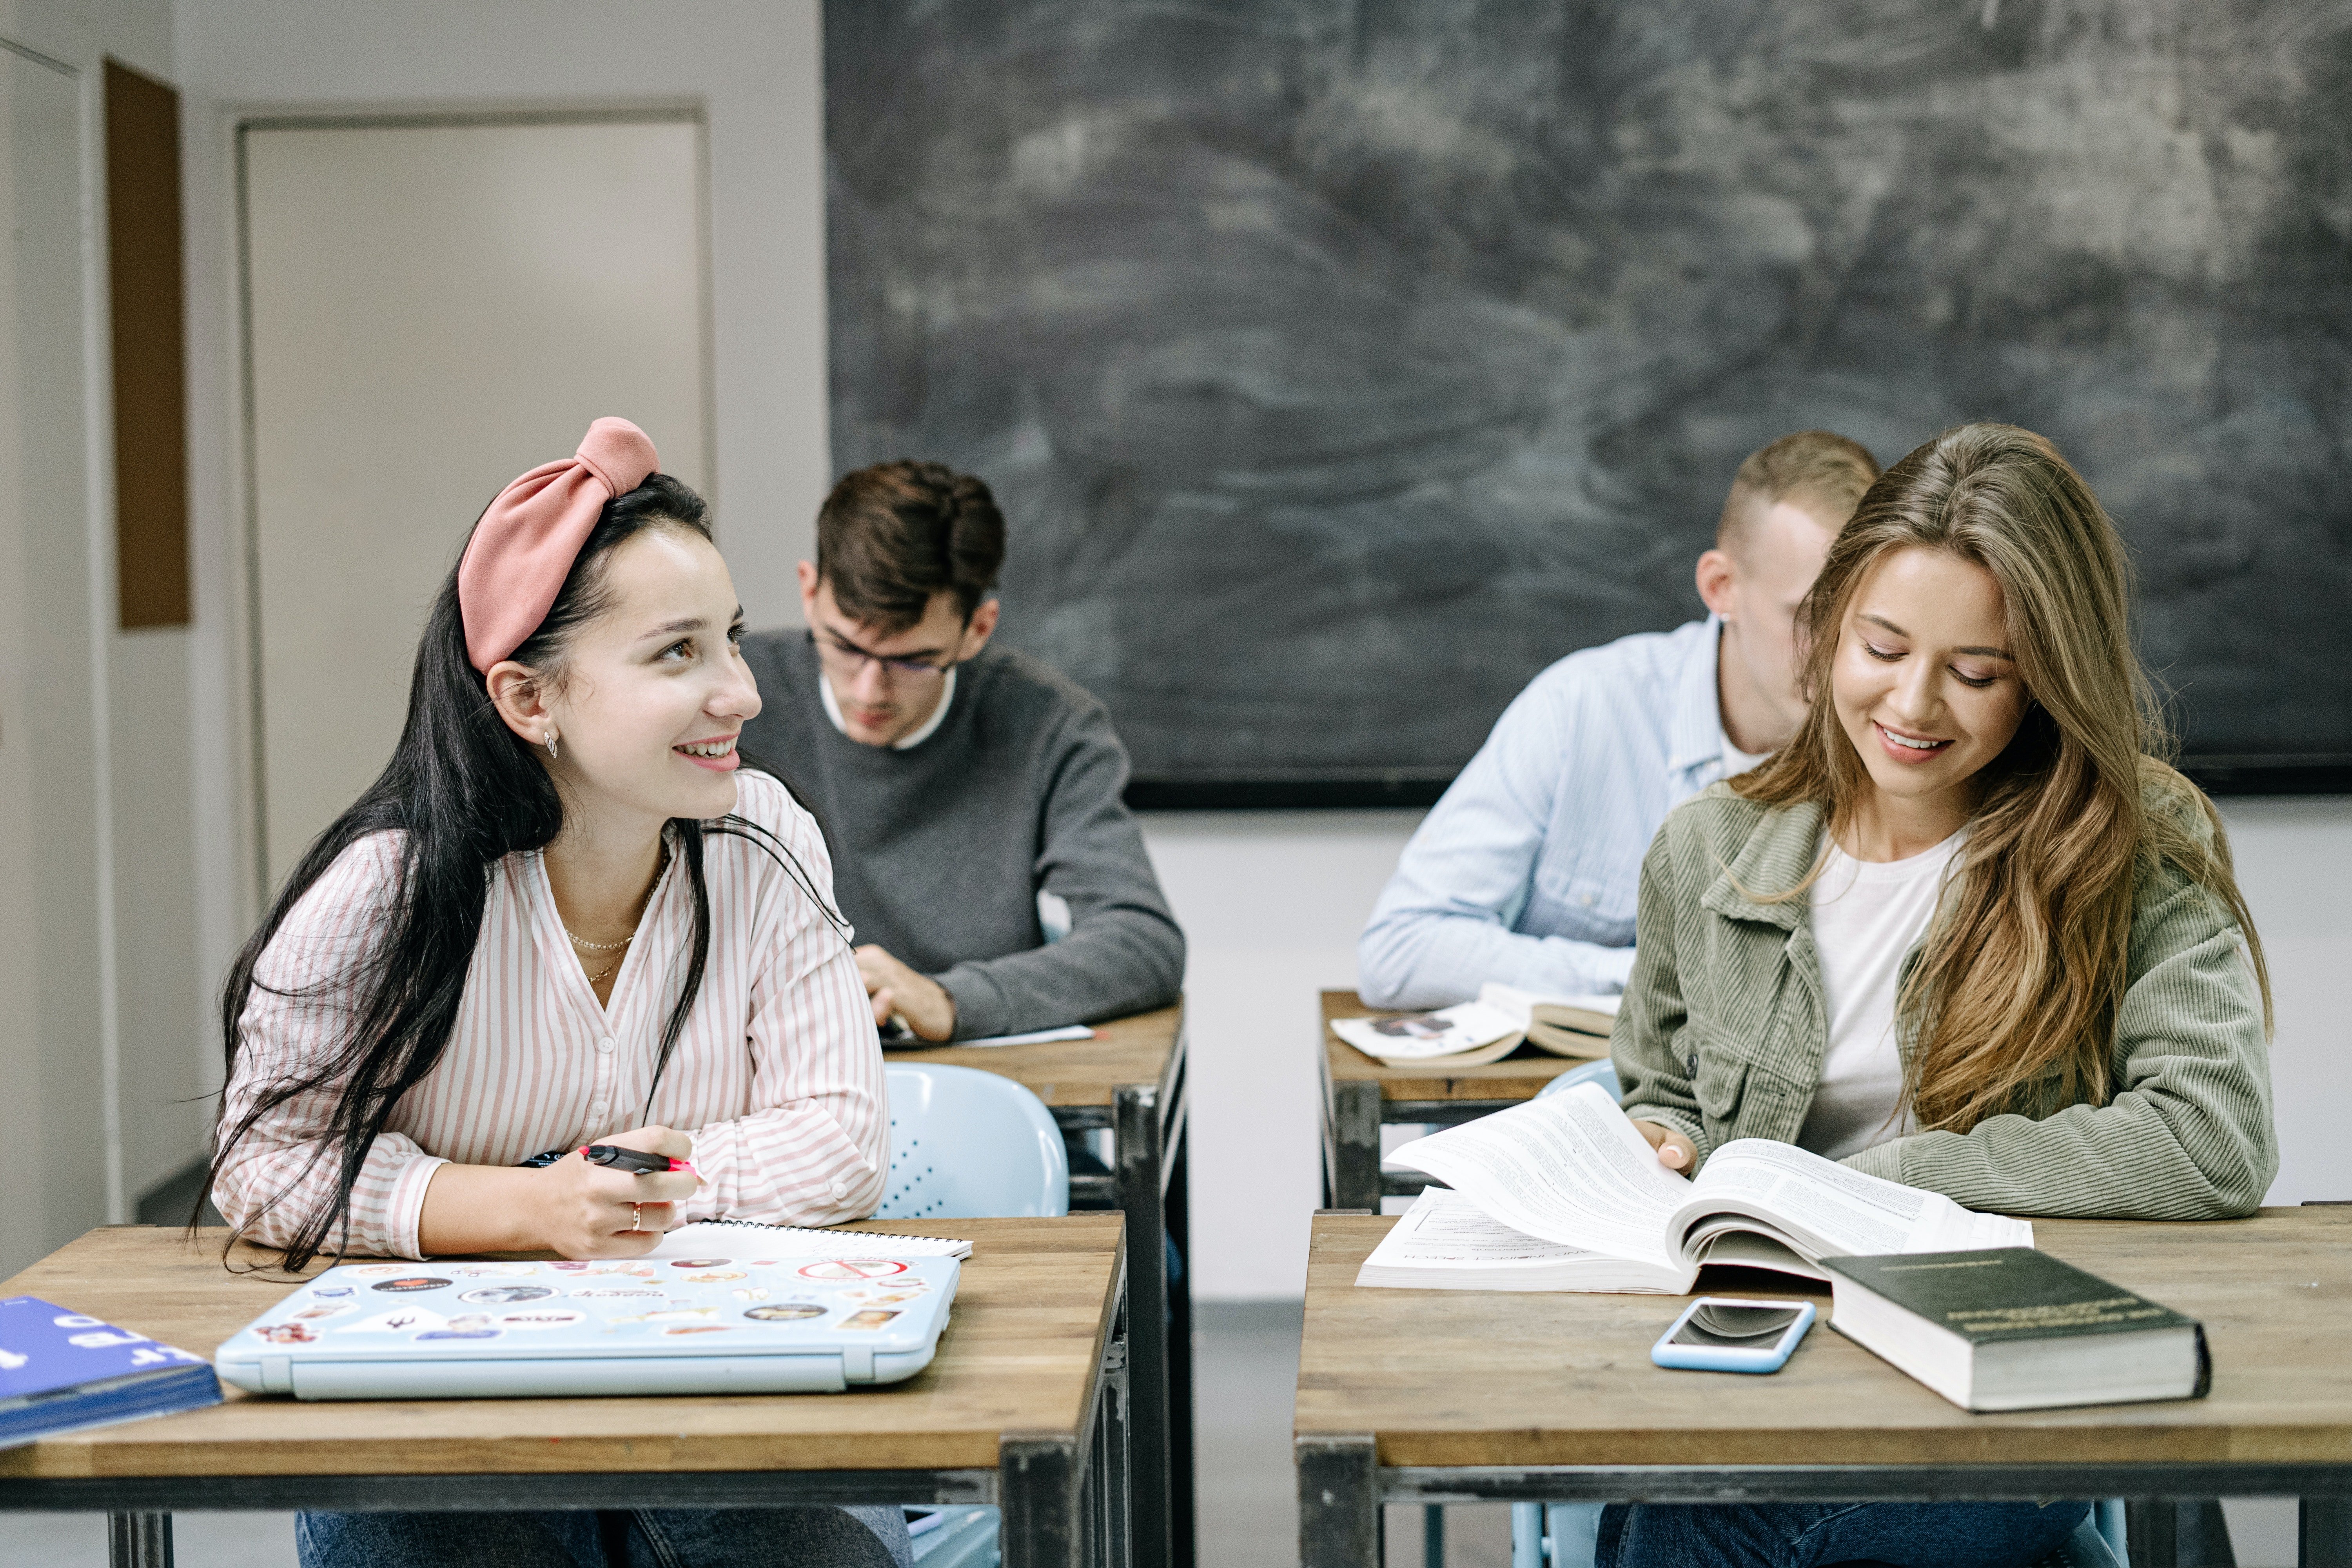 Pictured - Four students in a classrooms | Source: Pexels 